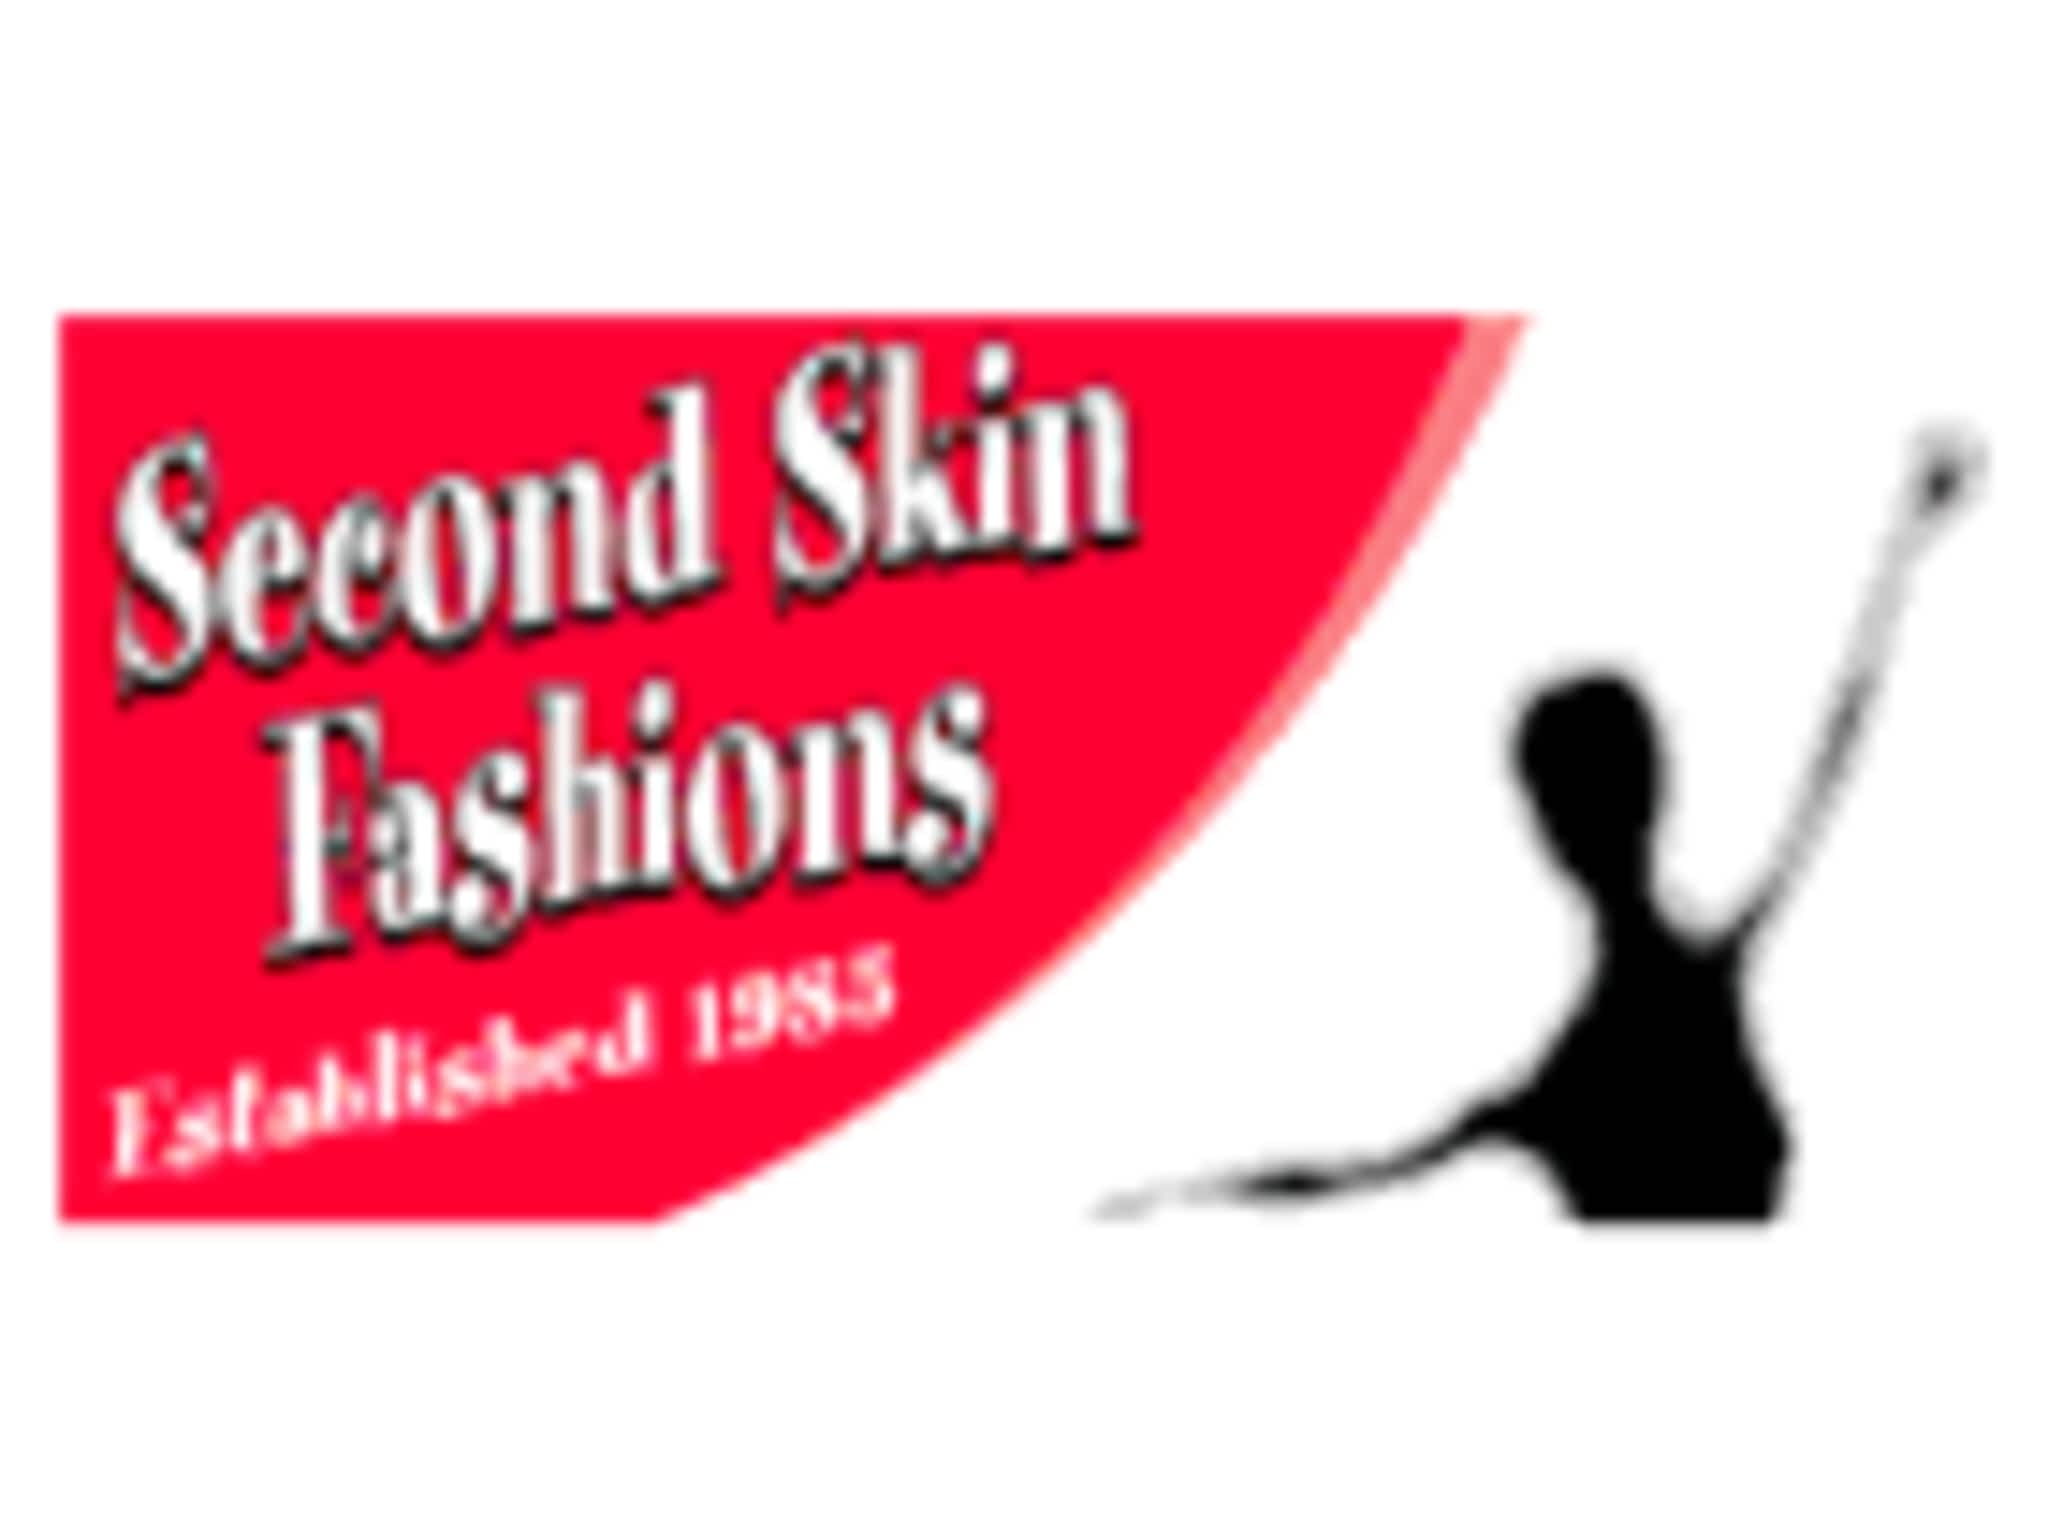 photo Second Skin Fashions Limited